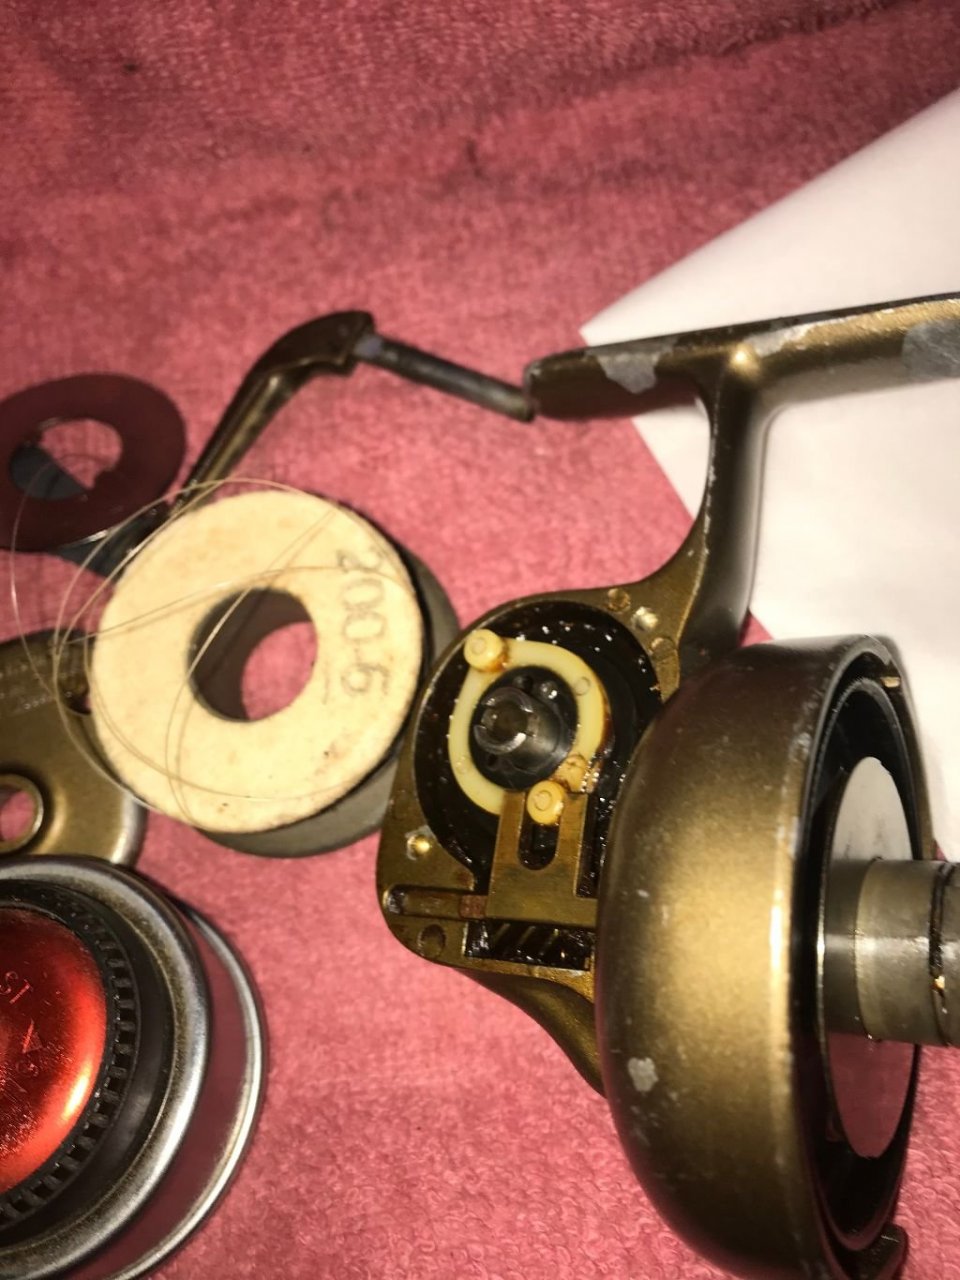 Heddon 200 Spin Pal Underspin- Need Schematic / Dissasembly Help